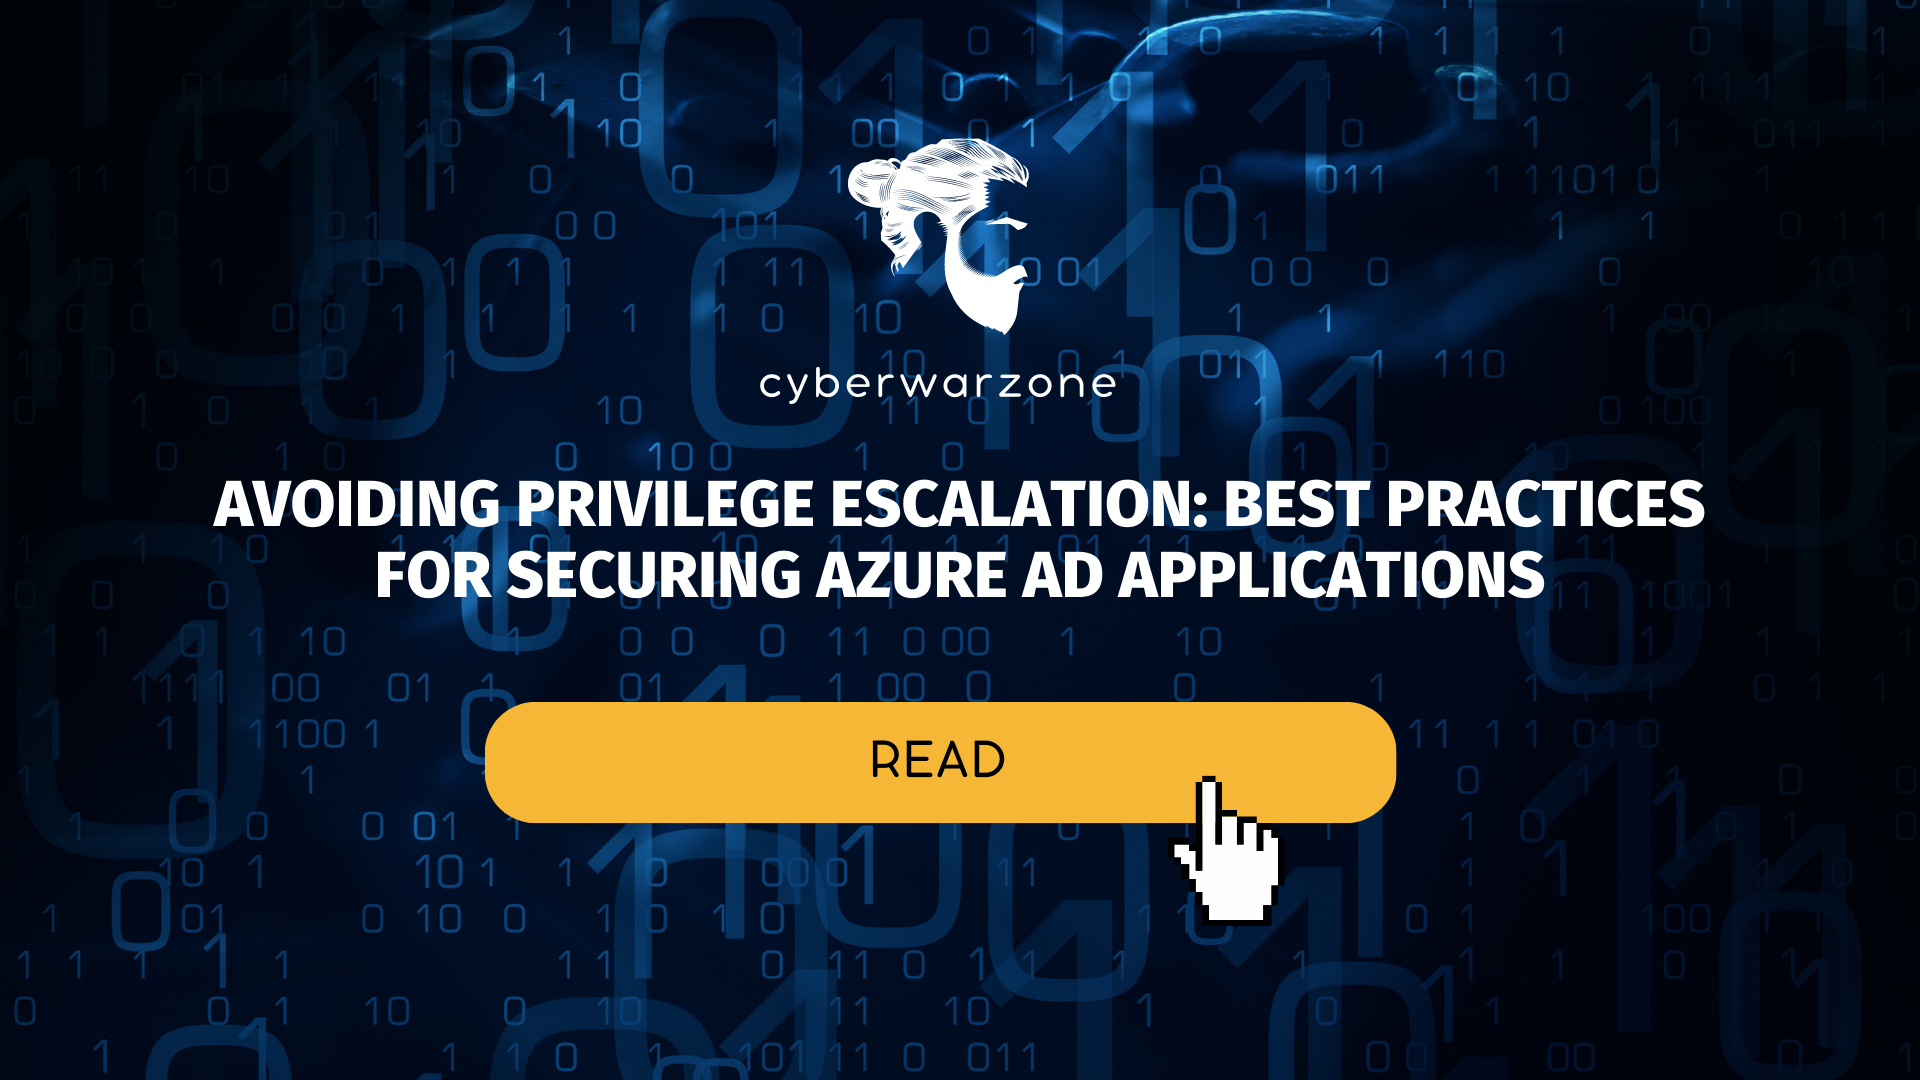 Avoiding Privilege Escalation: Best Practices for Securing Azure AD Applications